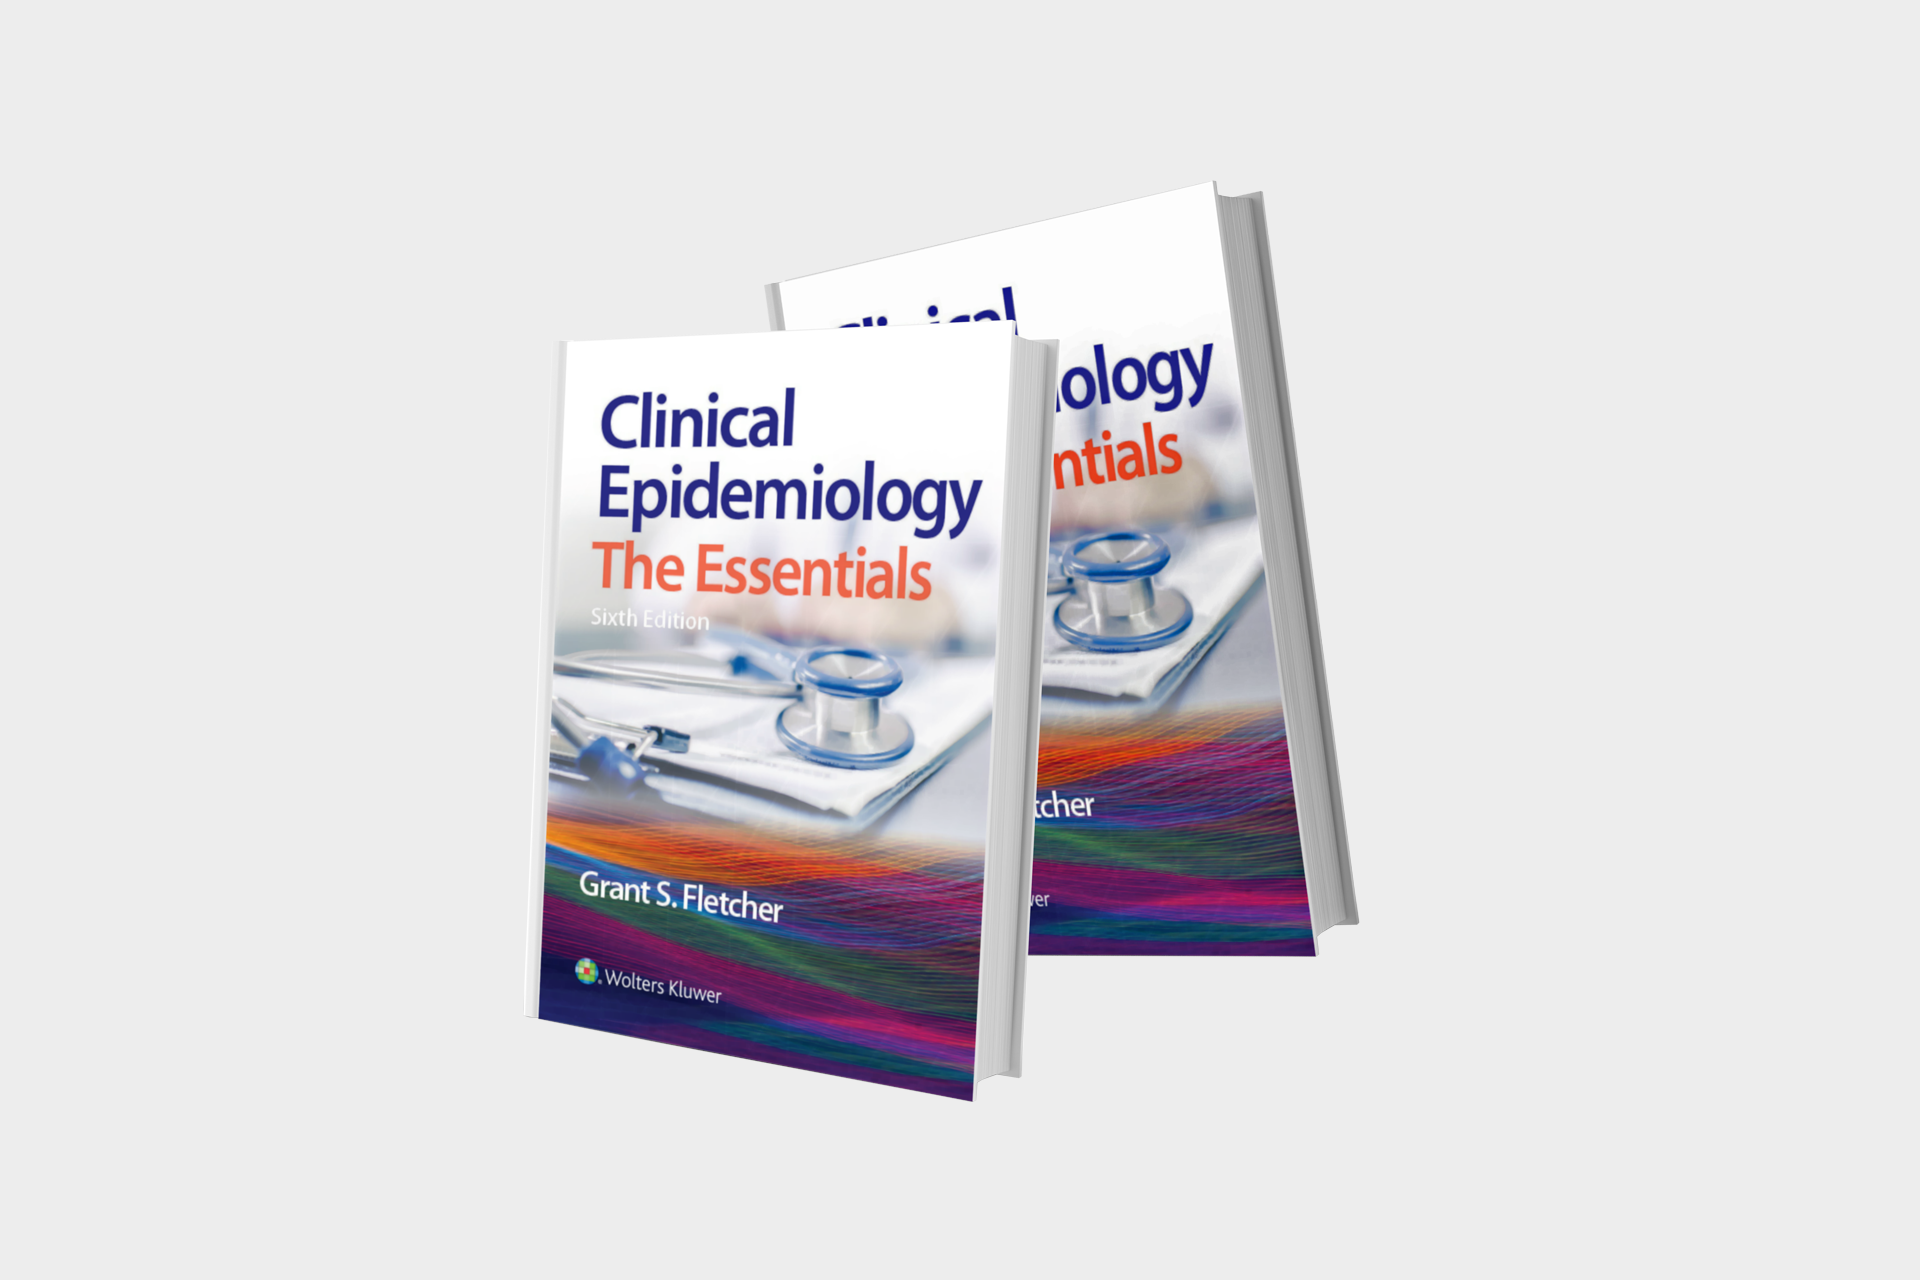 Clinical epidemiology the essentials pdf free download cisco packet tracer free download for windows 10 64 bit